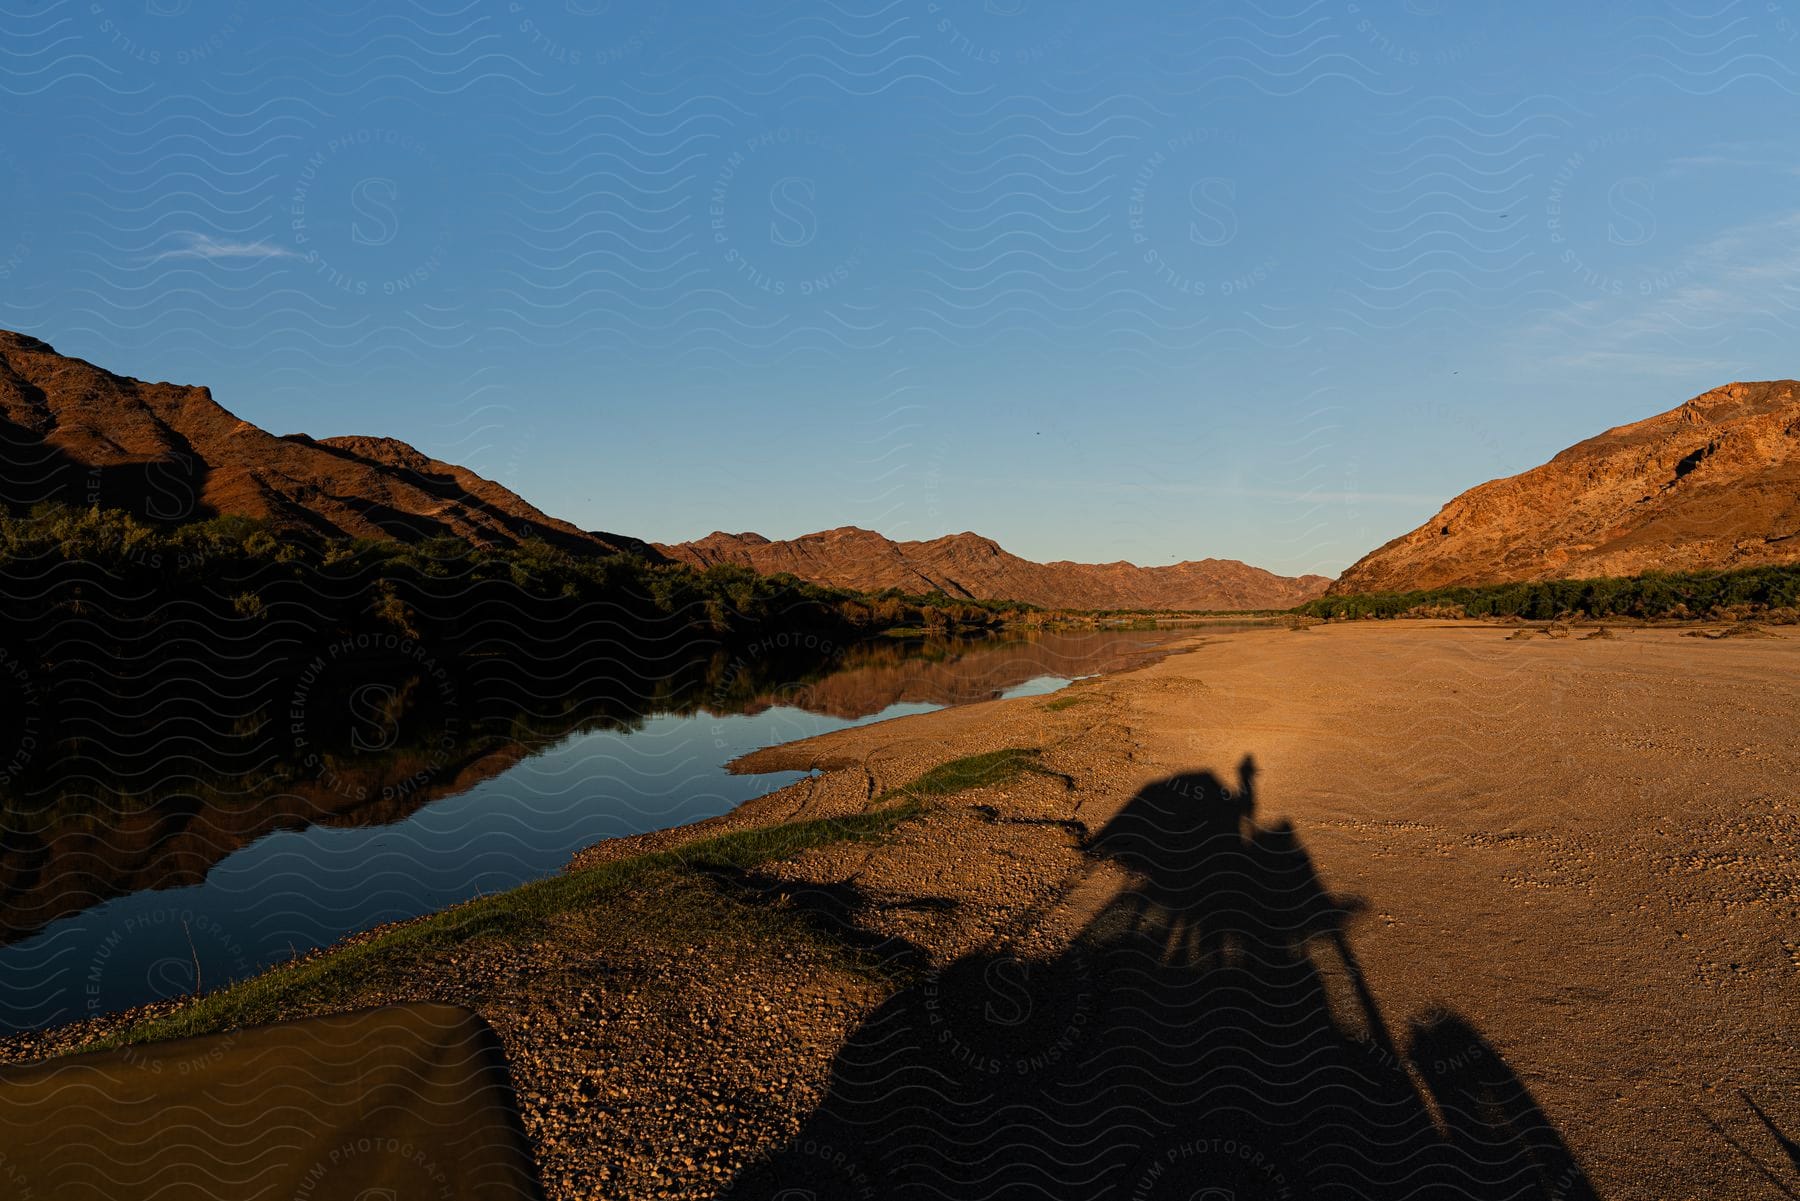 Arid landscape with mountains around and a reflective lake